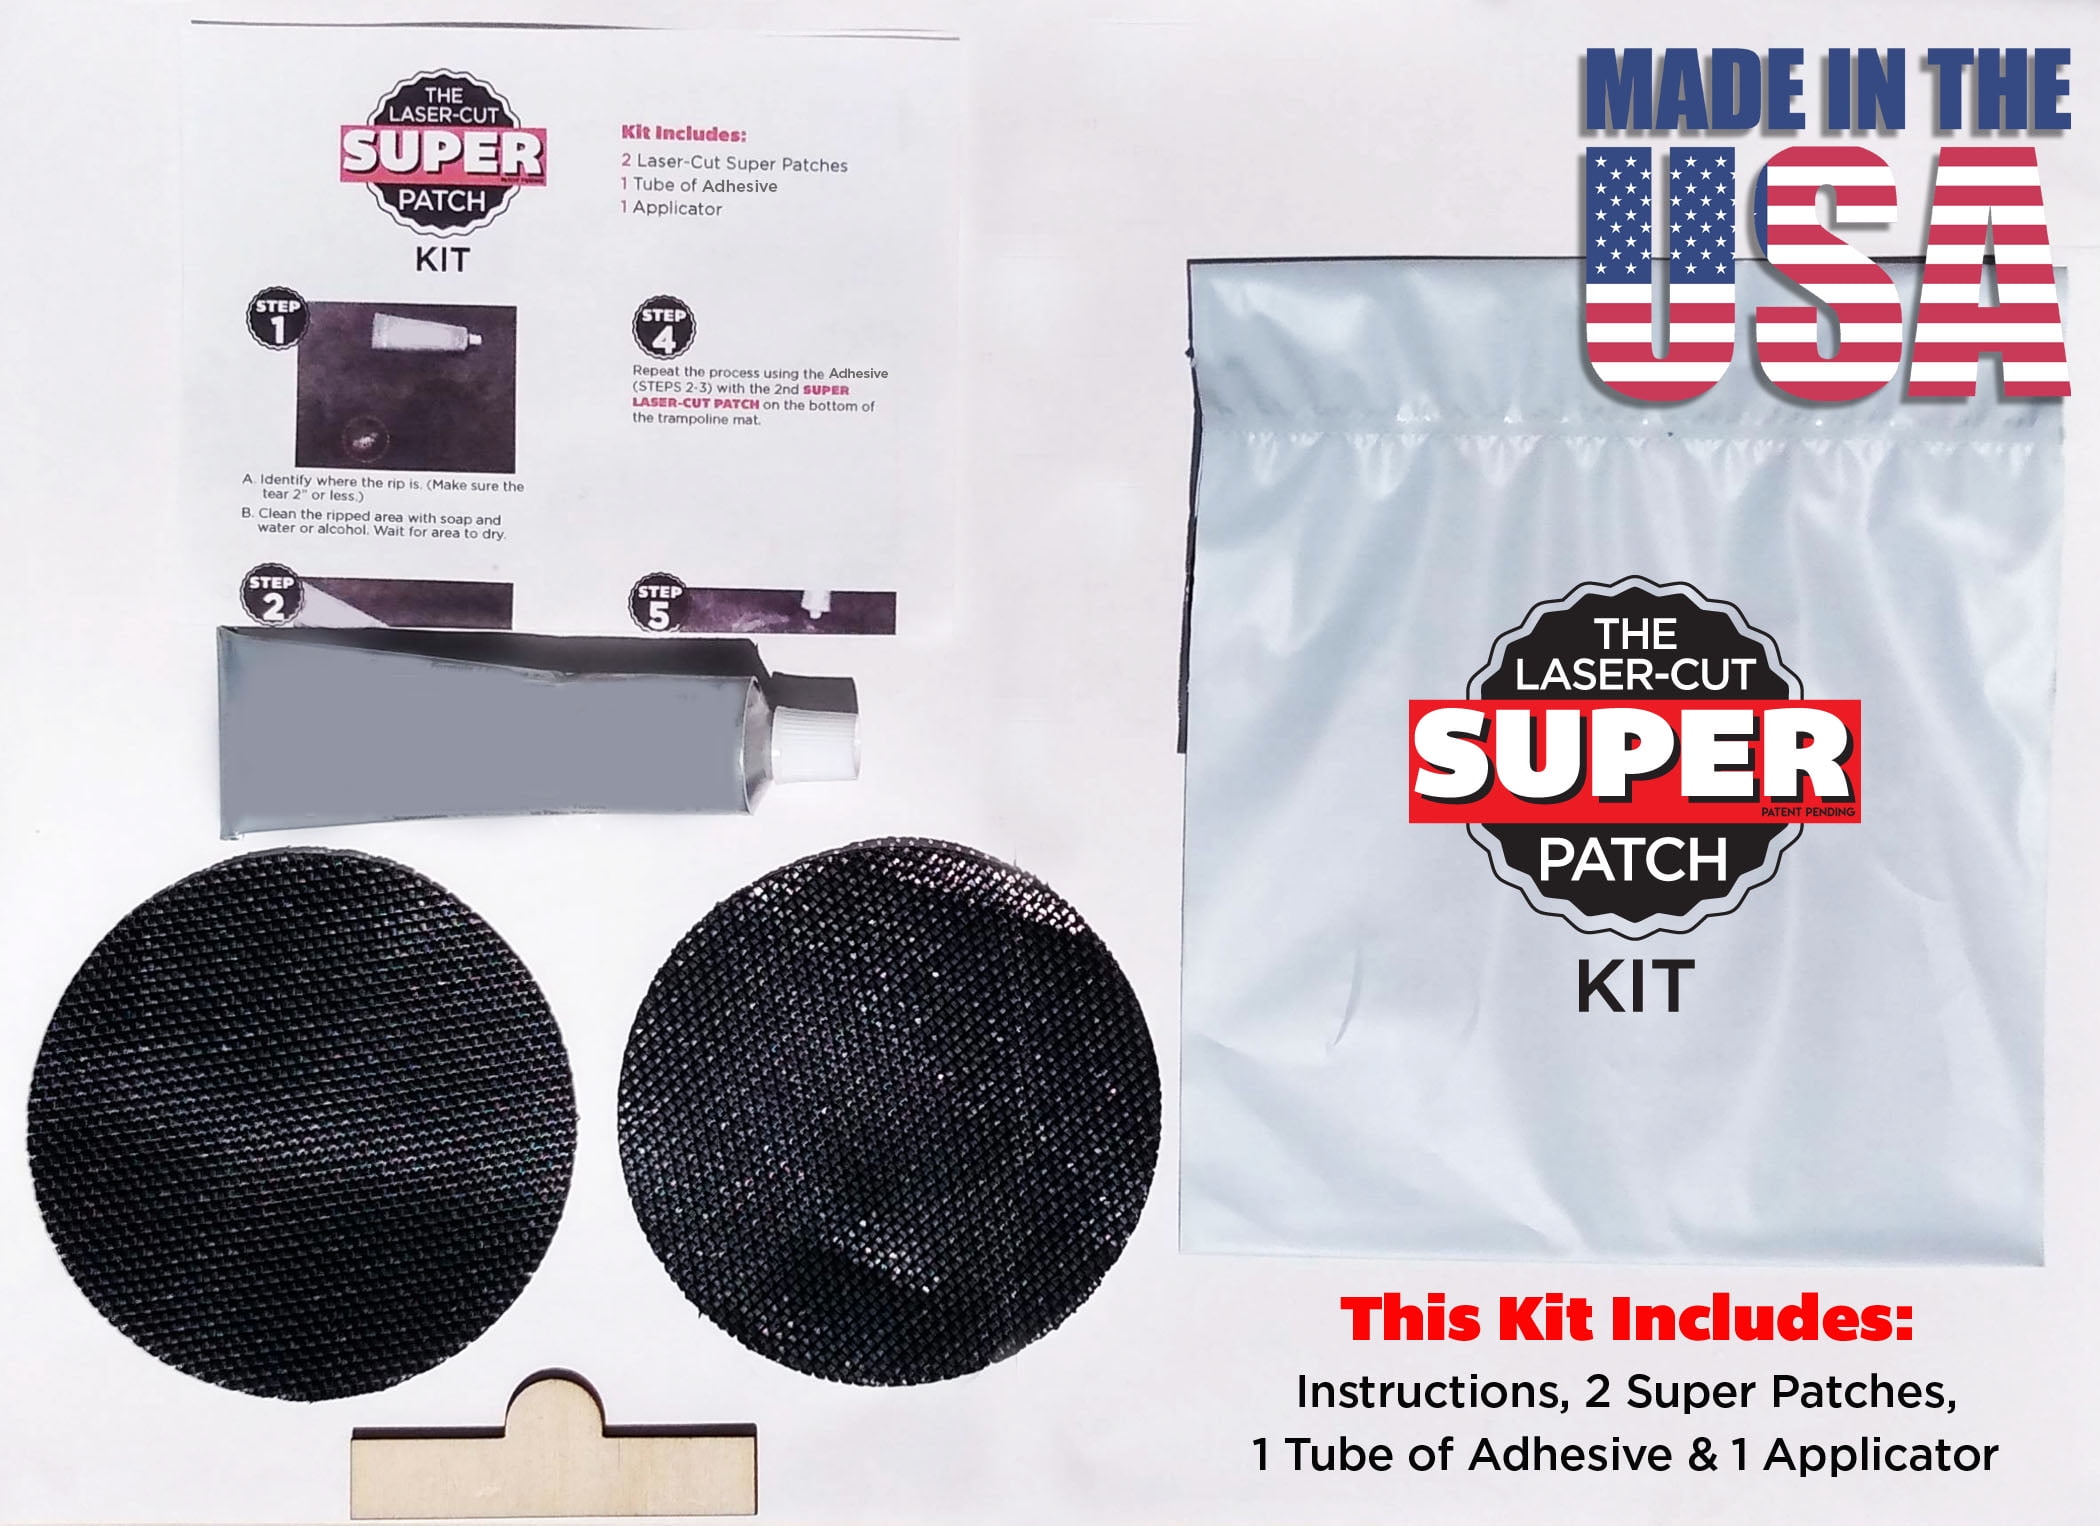 Trampoline Repair Patch Kit Trampoline Repair Kit Wear-resistant And  Portable Trampoline Accessories For Tent Fixing Mat Tear Or